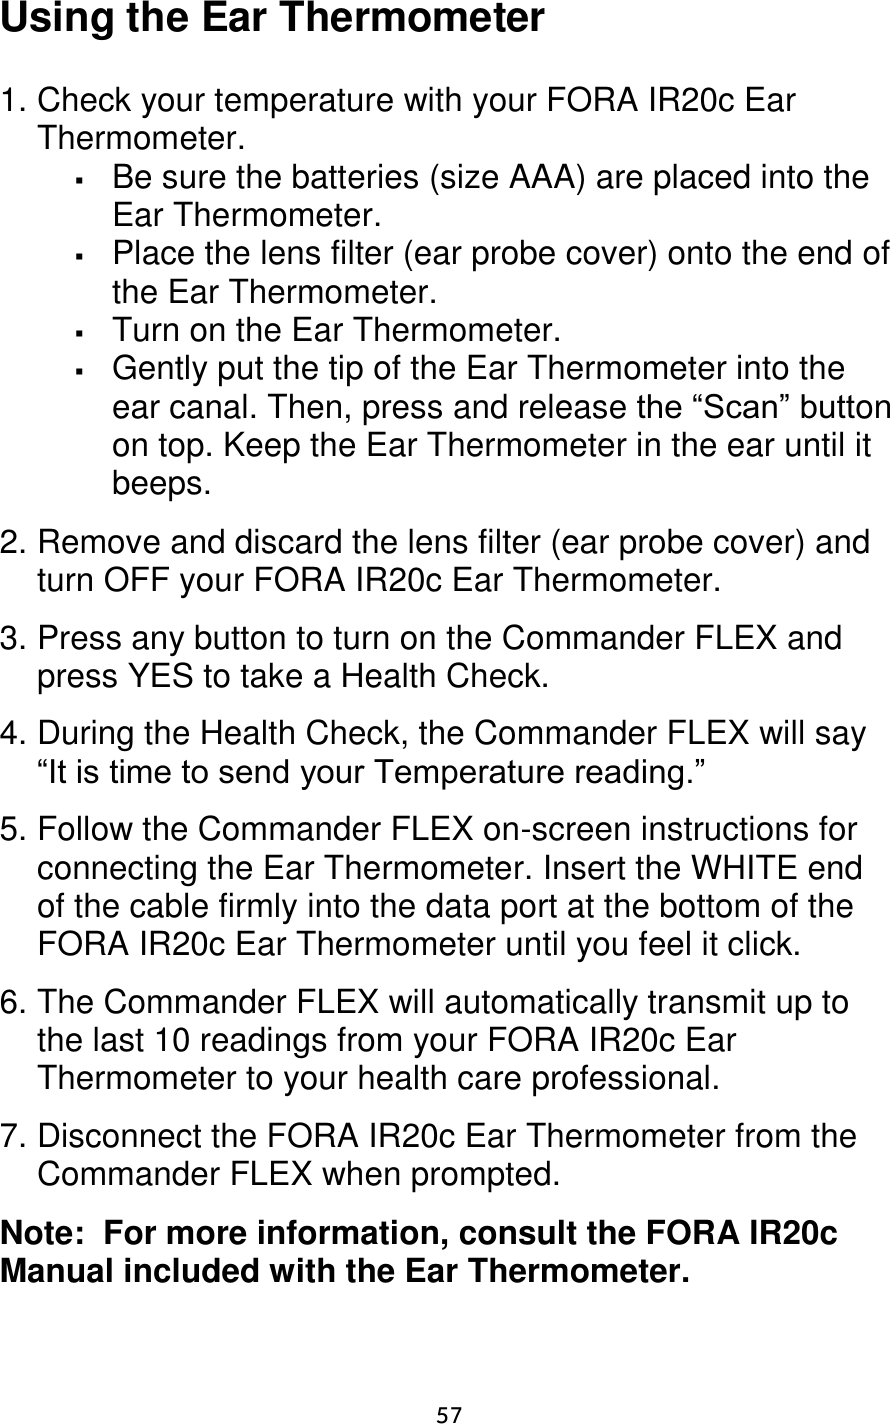                      57 Using the Ear Thermometer  1. Check your temperature with your FORA IR20c Ear Thermometer.    Be sure the batteries (size AAA) are placed into the Ear Thermometer.  Place the lens filter (ear probe cover) onto the end of the Ear Thermometer.  Turn on the Ear Thermometer.  Gently put the tip of the Ear Thermometer into the ear canal. Then, press and release the “Scan” button on top. Keep the Ear Thermometer in the ear until it beeps.  2. Remove and discard the lens filter (ear probe cover) and turn OFF your FORA IR20c Ear Thermometer.  3. Press any button to turn on the Commander FLEX and press YES to take a Health Check.   4. During the Health Check, the Commander FLEX will say “It is time to send your Temperature reading.”  5. Follow the Commander FLEX on-screen instructions for connecting the Ear Thermometer. Insert the WHITE end of the cable firmly into the data port at the bottom of the FORA IR20c Ear Thermometer until you feel it click.  6. The Commander FLEX will automatically transmit up to the last 10 readings from your FORA IR20c Ear Thermometer to your health care professional.   7. Disconnect the FORA IR20c Ear Thermometer from the Commander FLEX when prompted.   Note:  For more information, consult the FORA IR20c Manual included with the Ear Thermometer. 